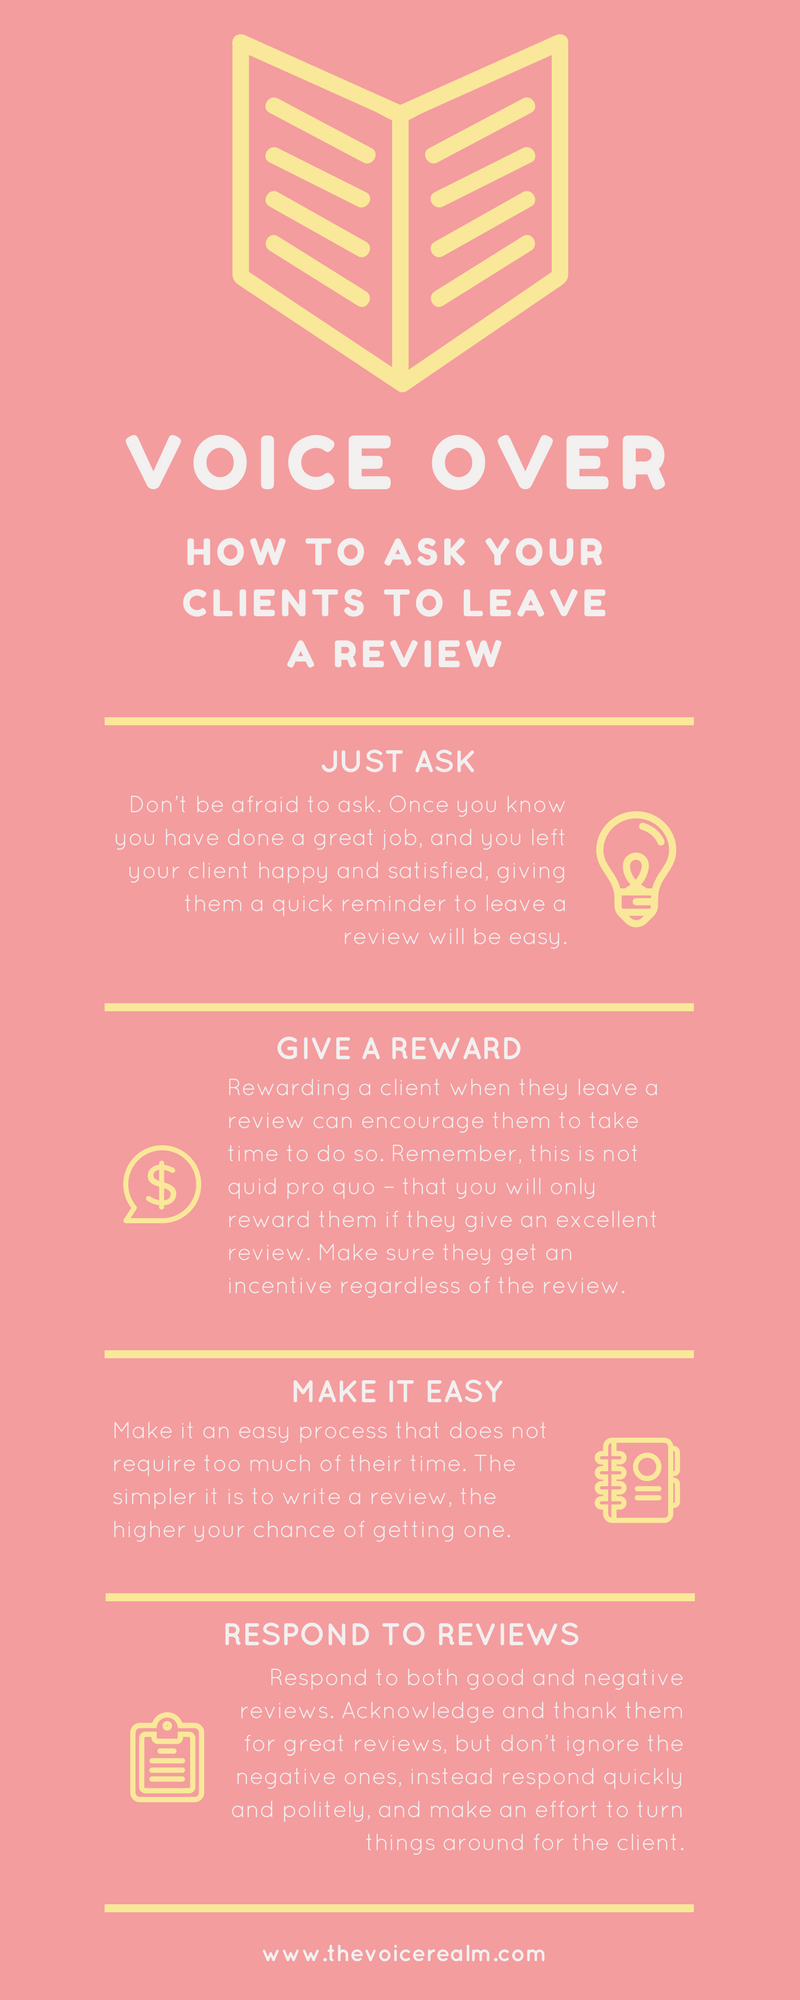 How to Ask Your Voice Over Clients to Leave a Review – The Voice Realm